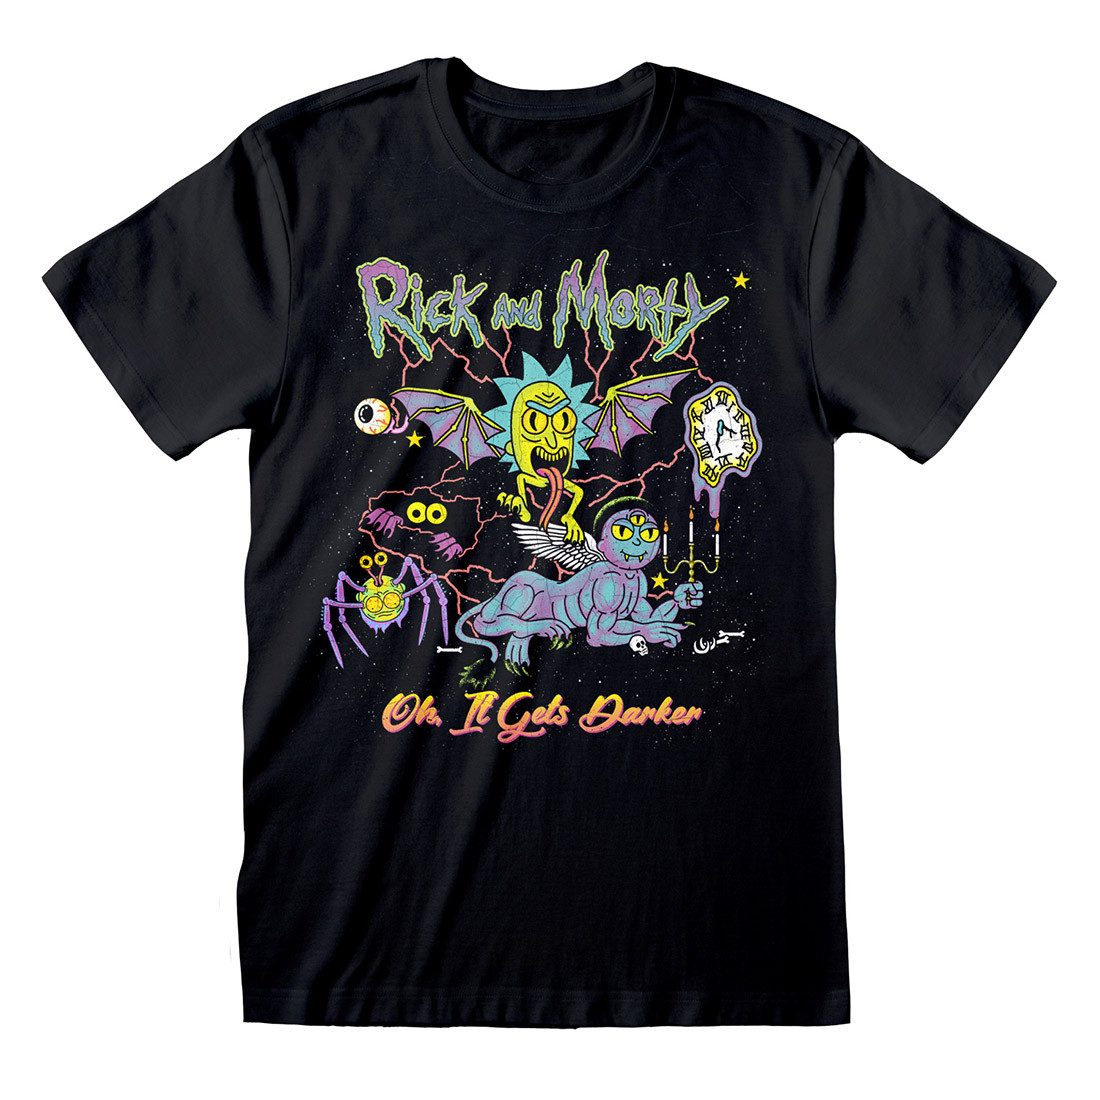 Rick and Morty T-Shirt Oh It Gets Darker